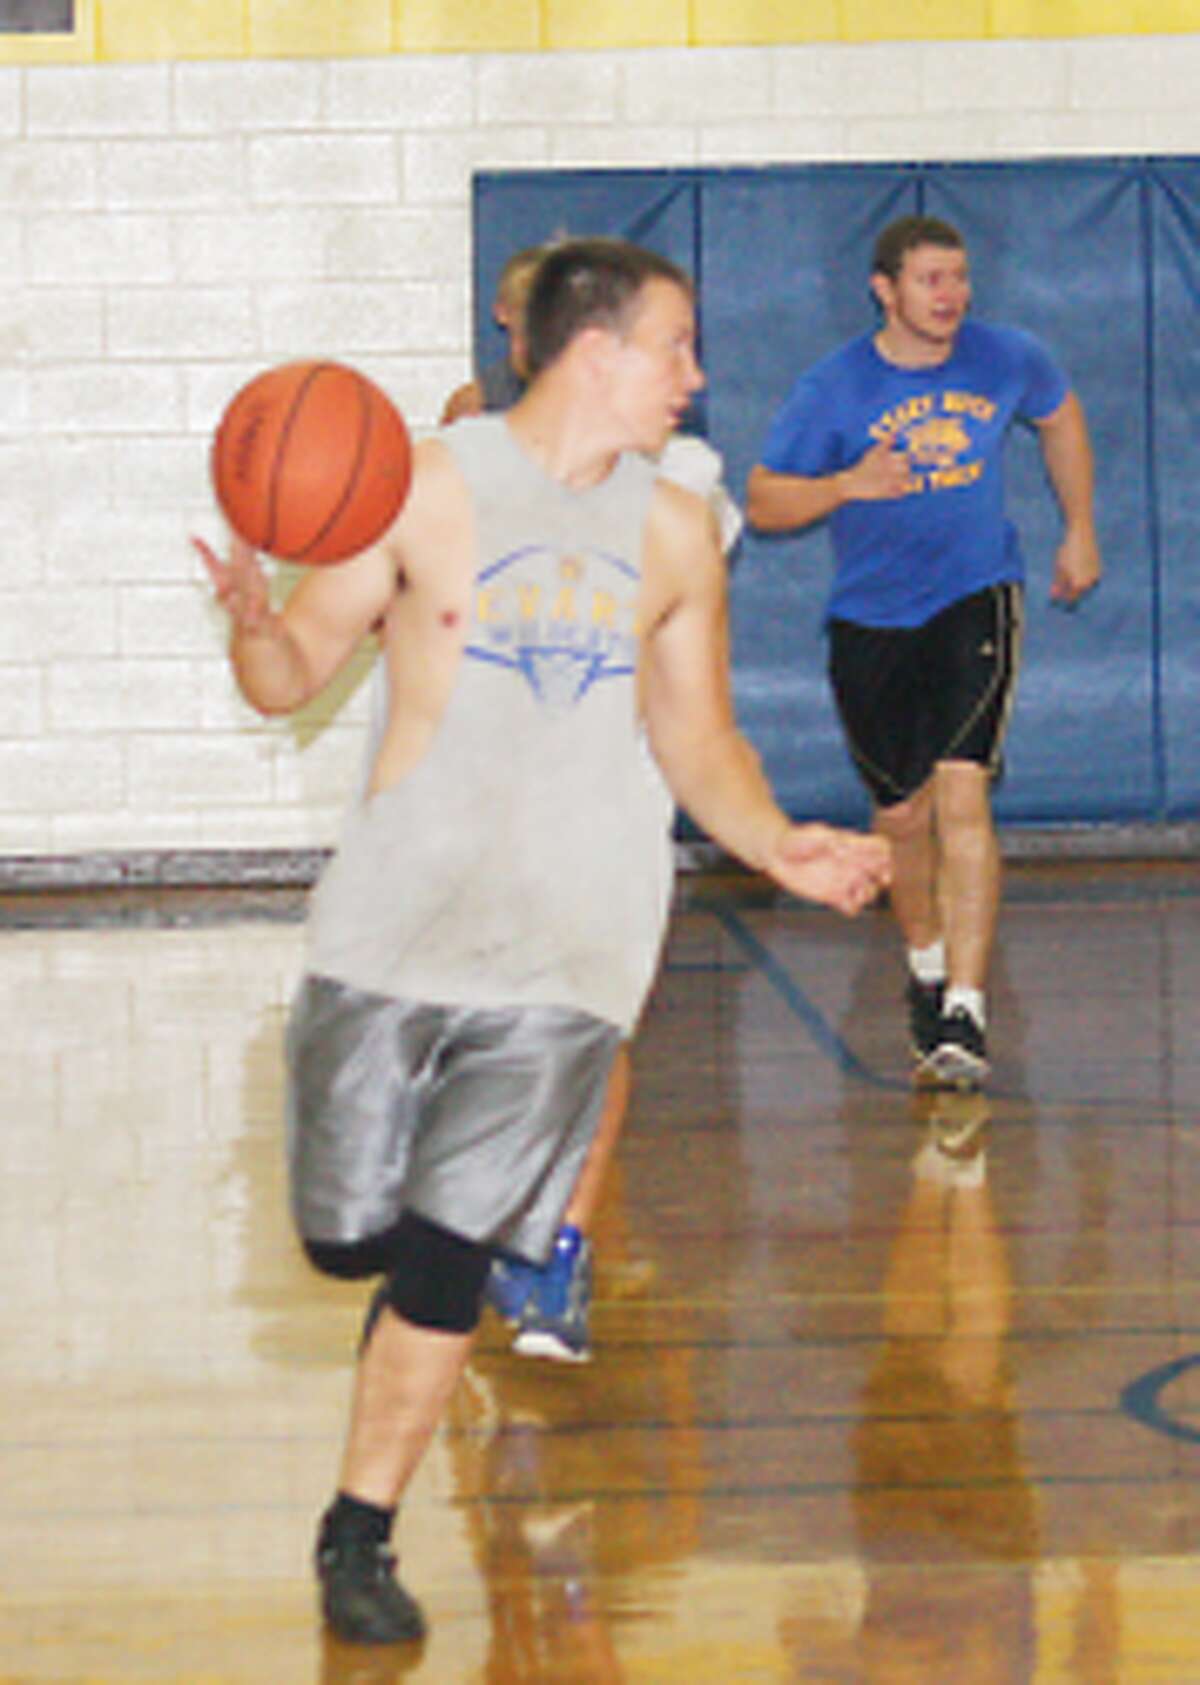 Staying in shape: Evart football players stayed in shape last week with a game of basketball. (Herald Review/John Raffel)